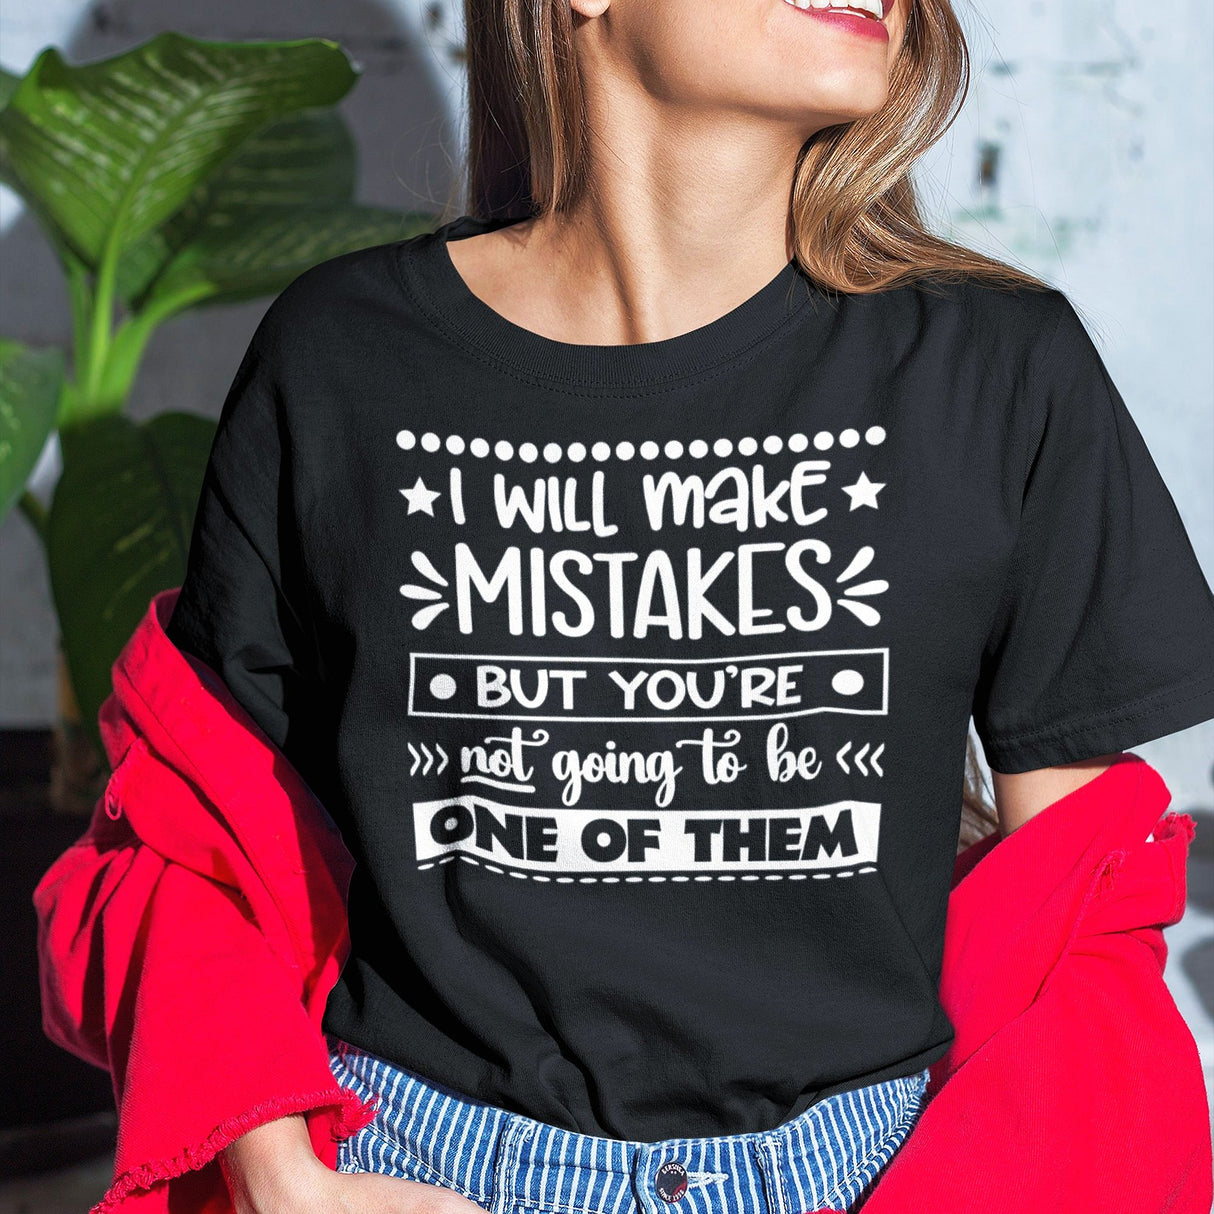 i-will-make-mistakes-but-youre-not-going-to-be-one-of-them-life-tee-funny-t-shirt-inspirational-tee-motivational-t-shirt-positive-tee#color_black